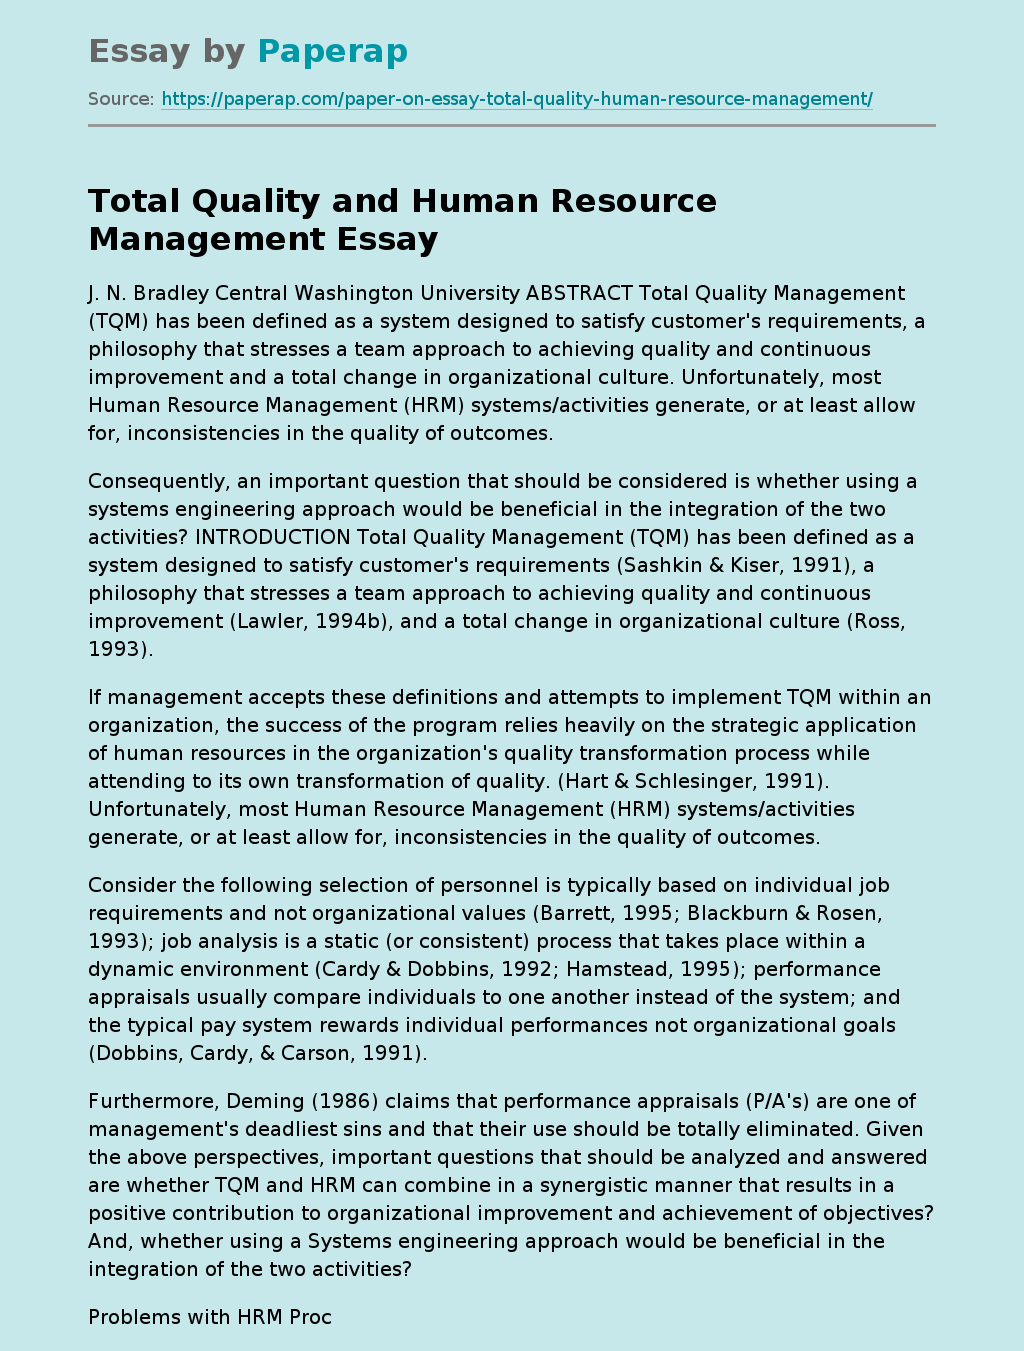 Total Quality and Human Resource Management